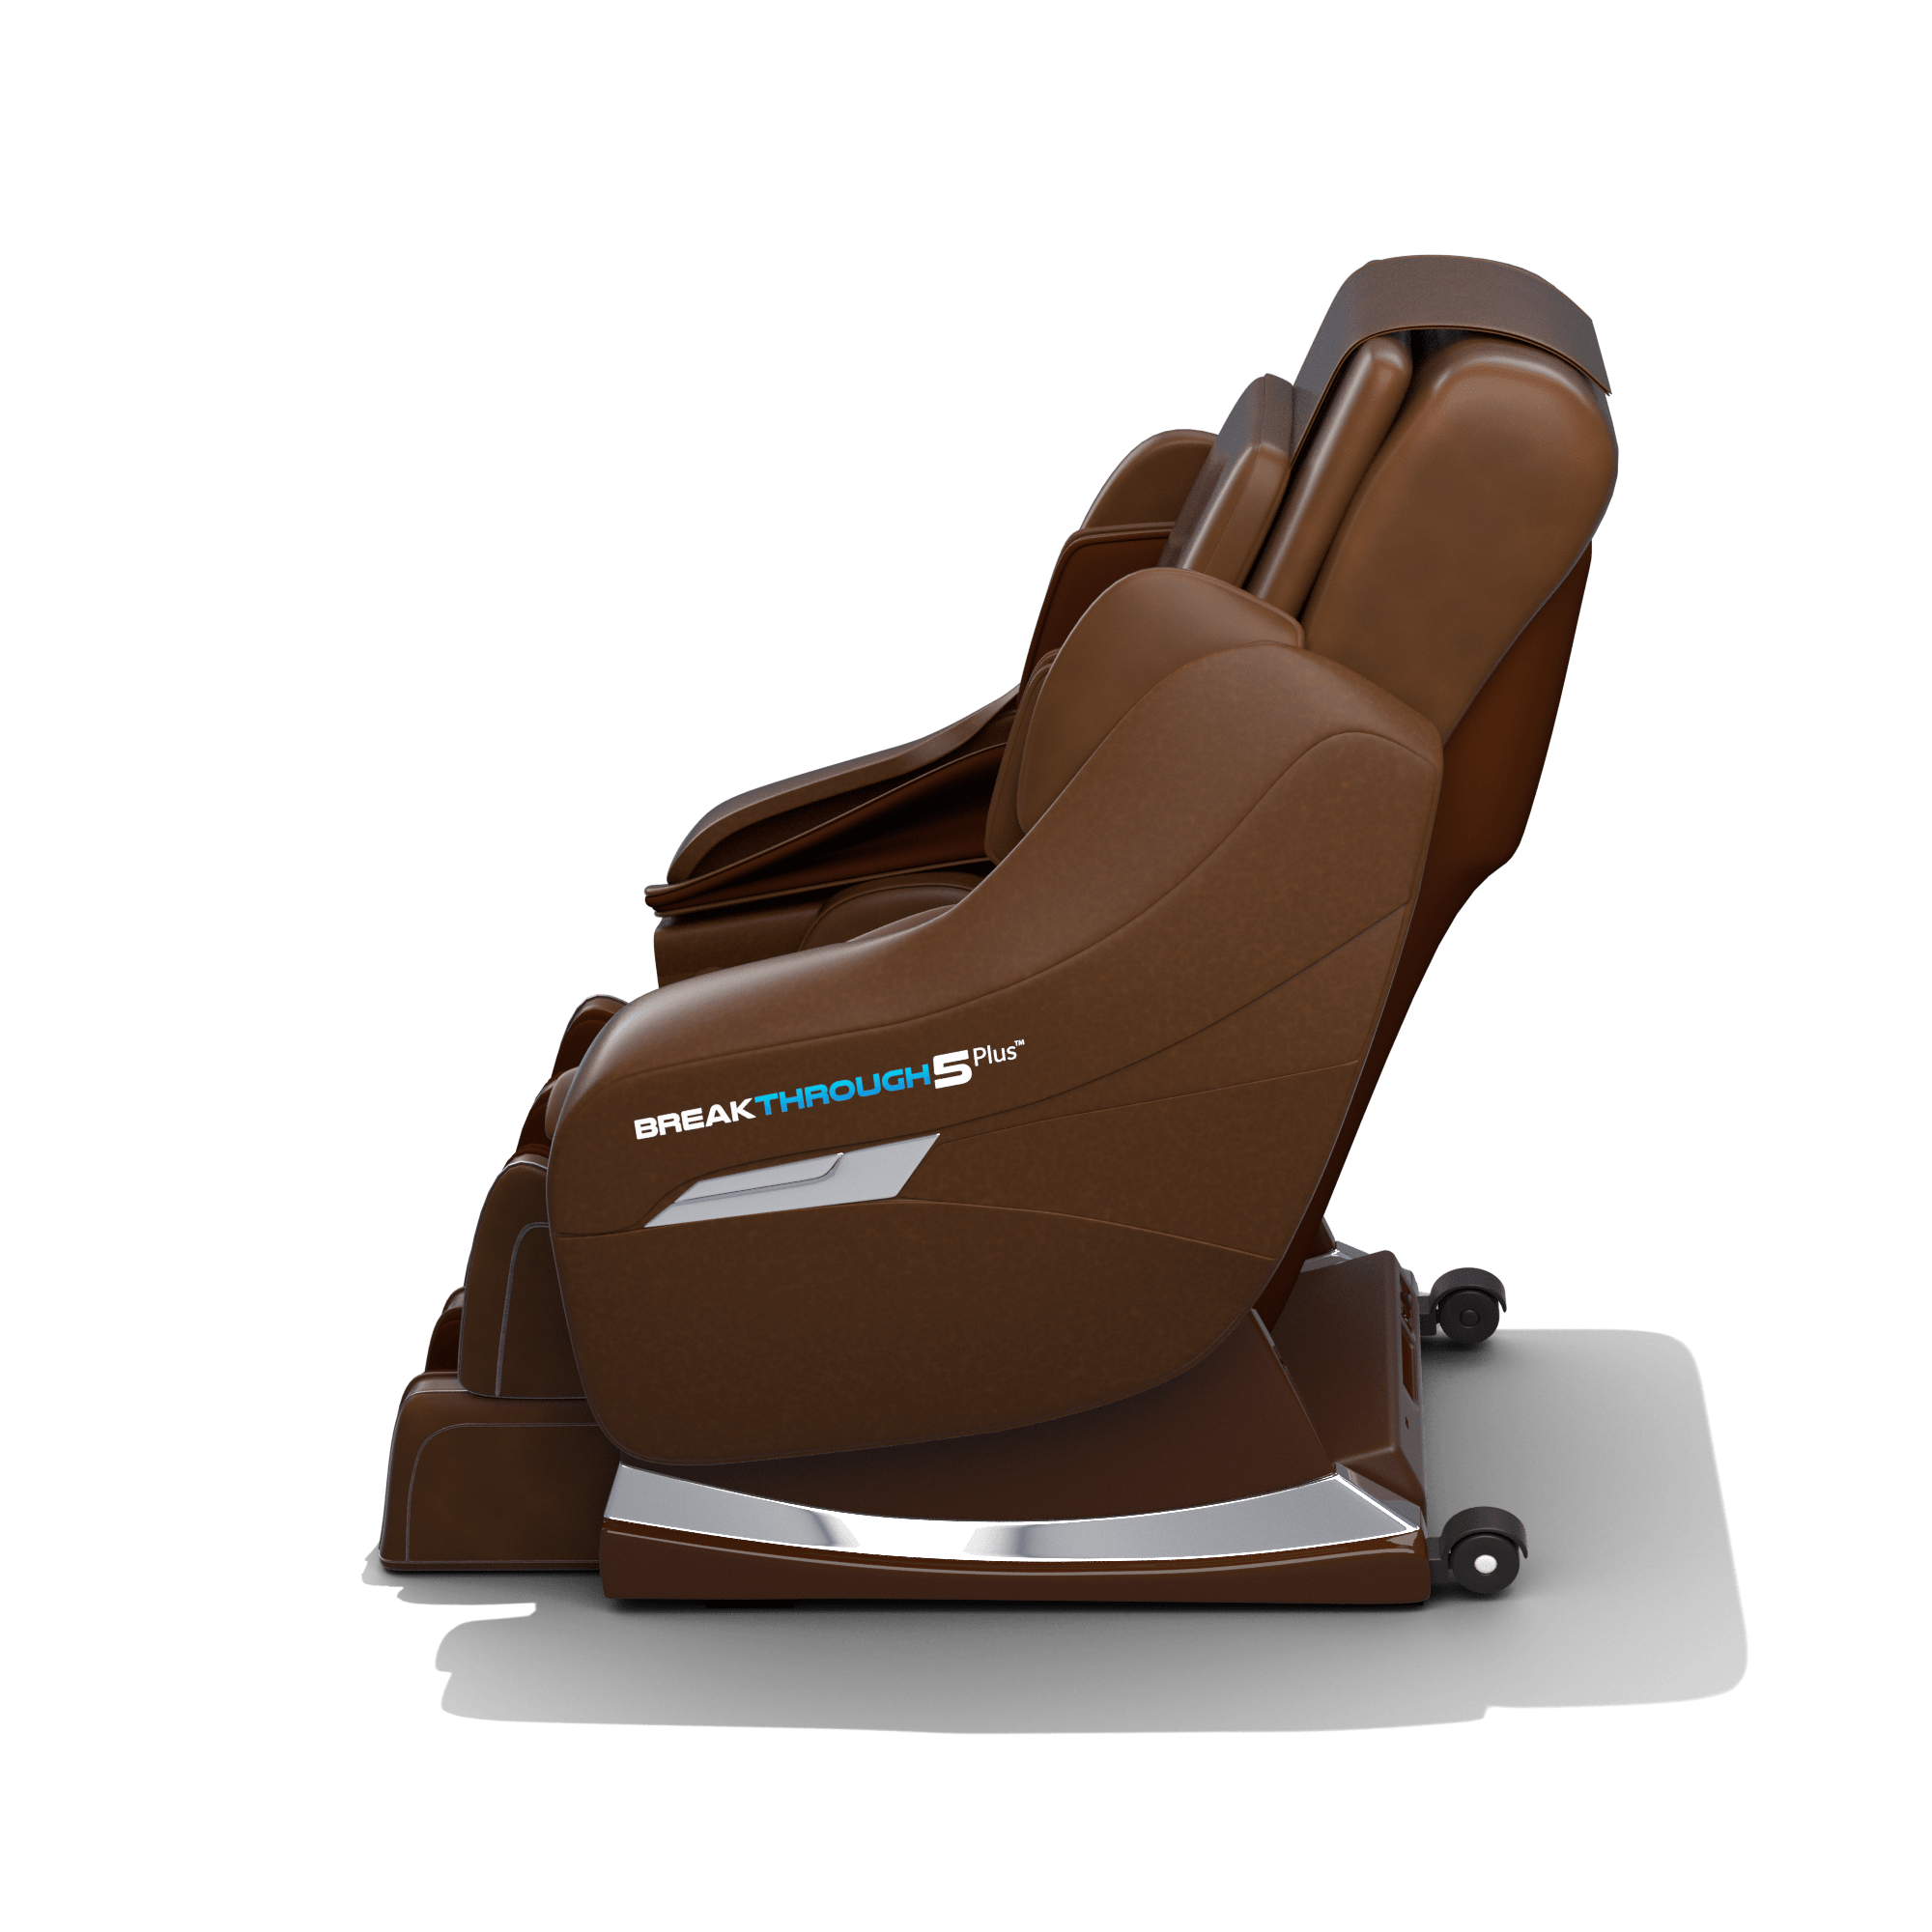 5 Massage Chairs That Are Great for Arm Massages – Massage Chair